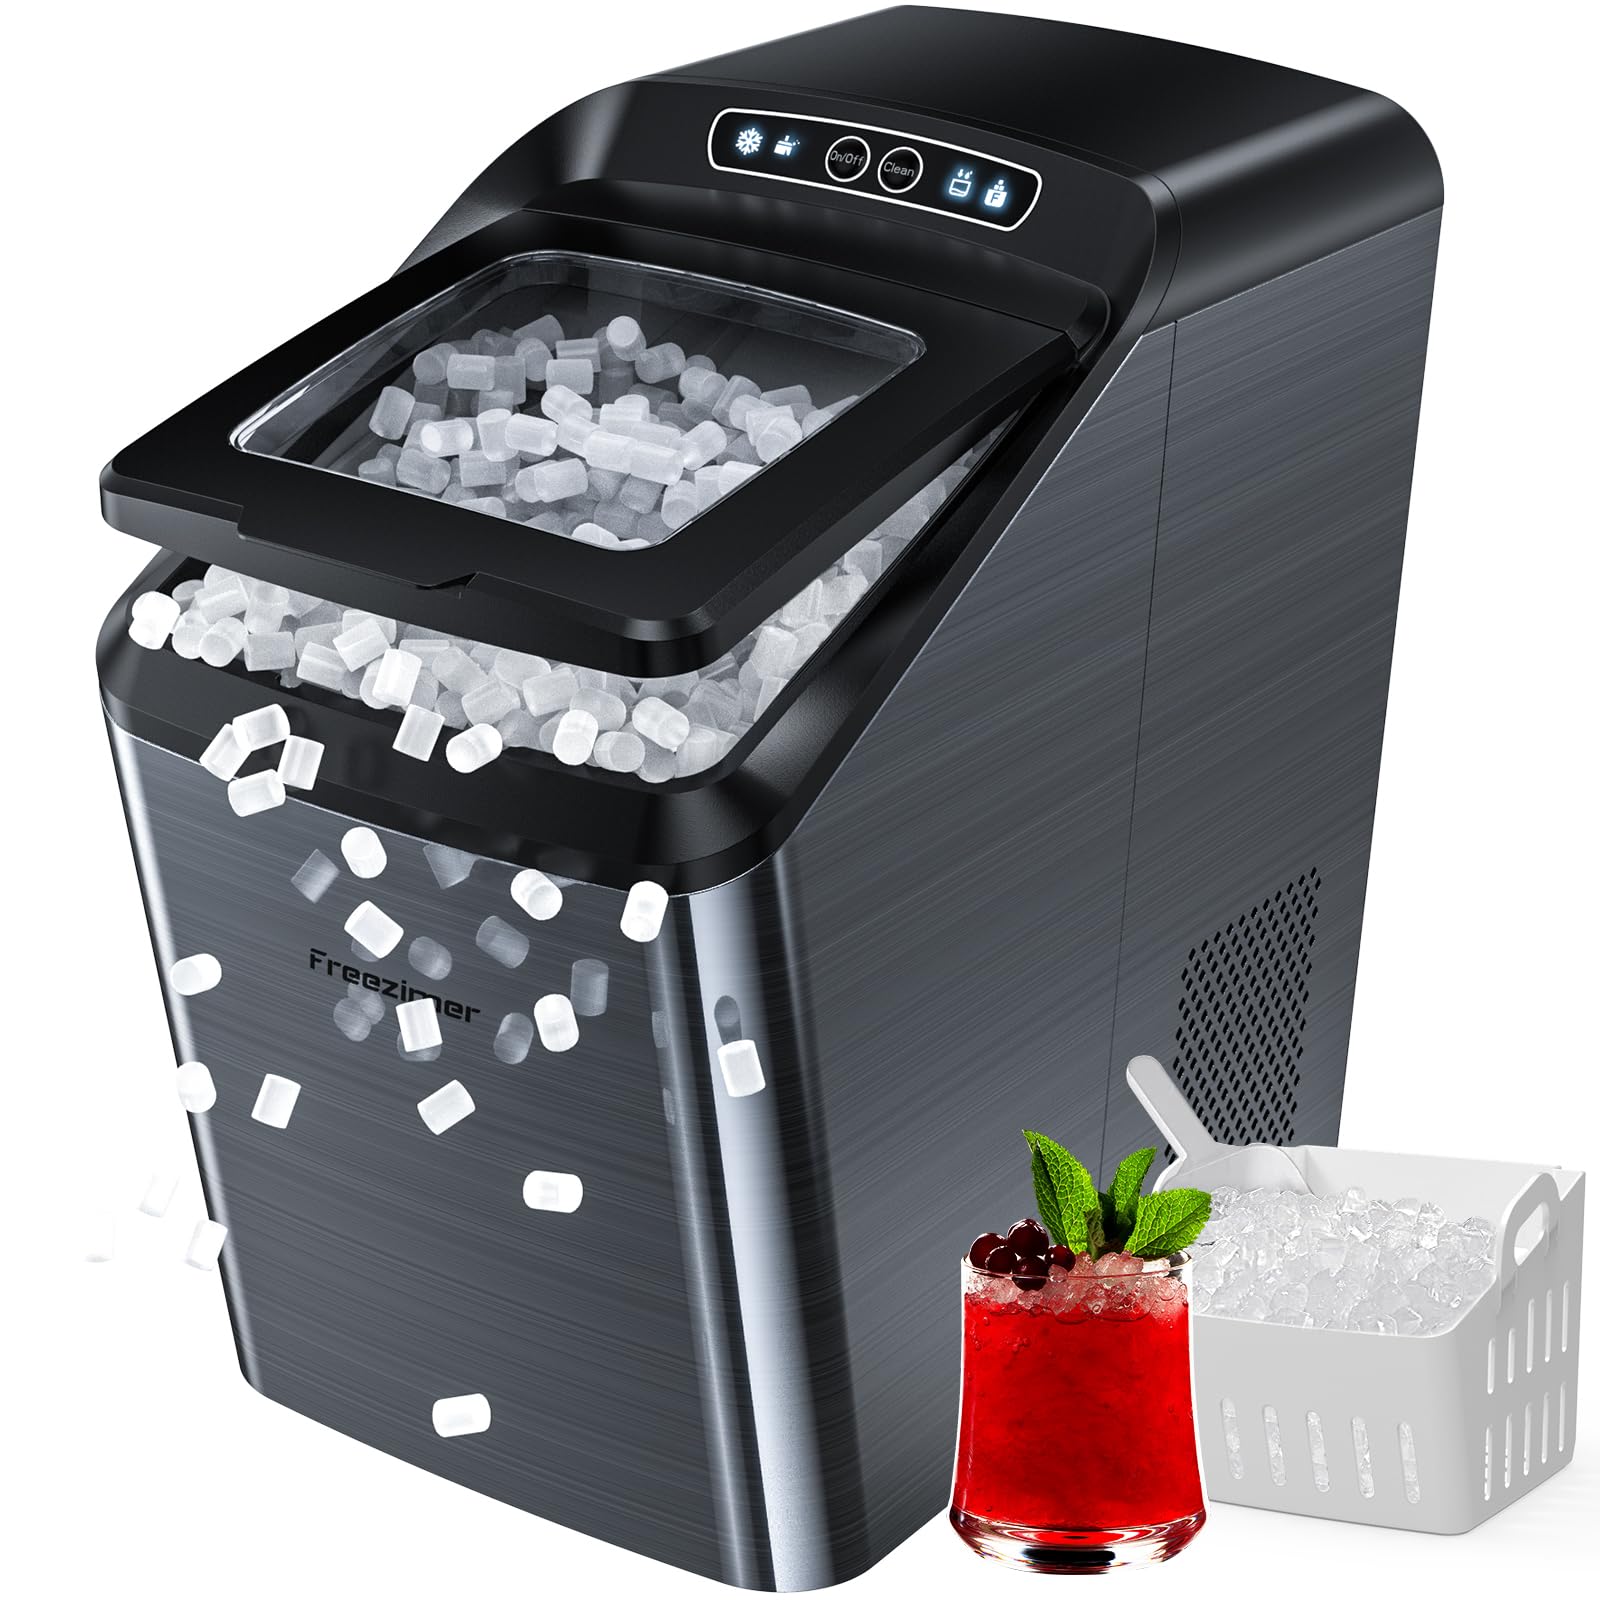 Freezimer Dreamice X2 | Nugget Ice Maker Countertop